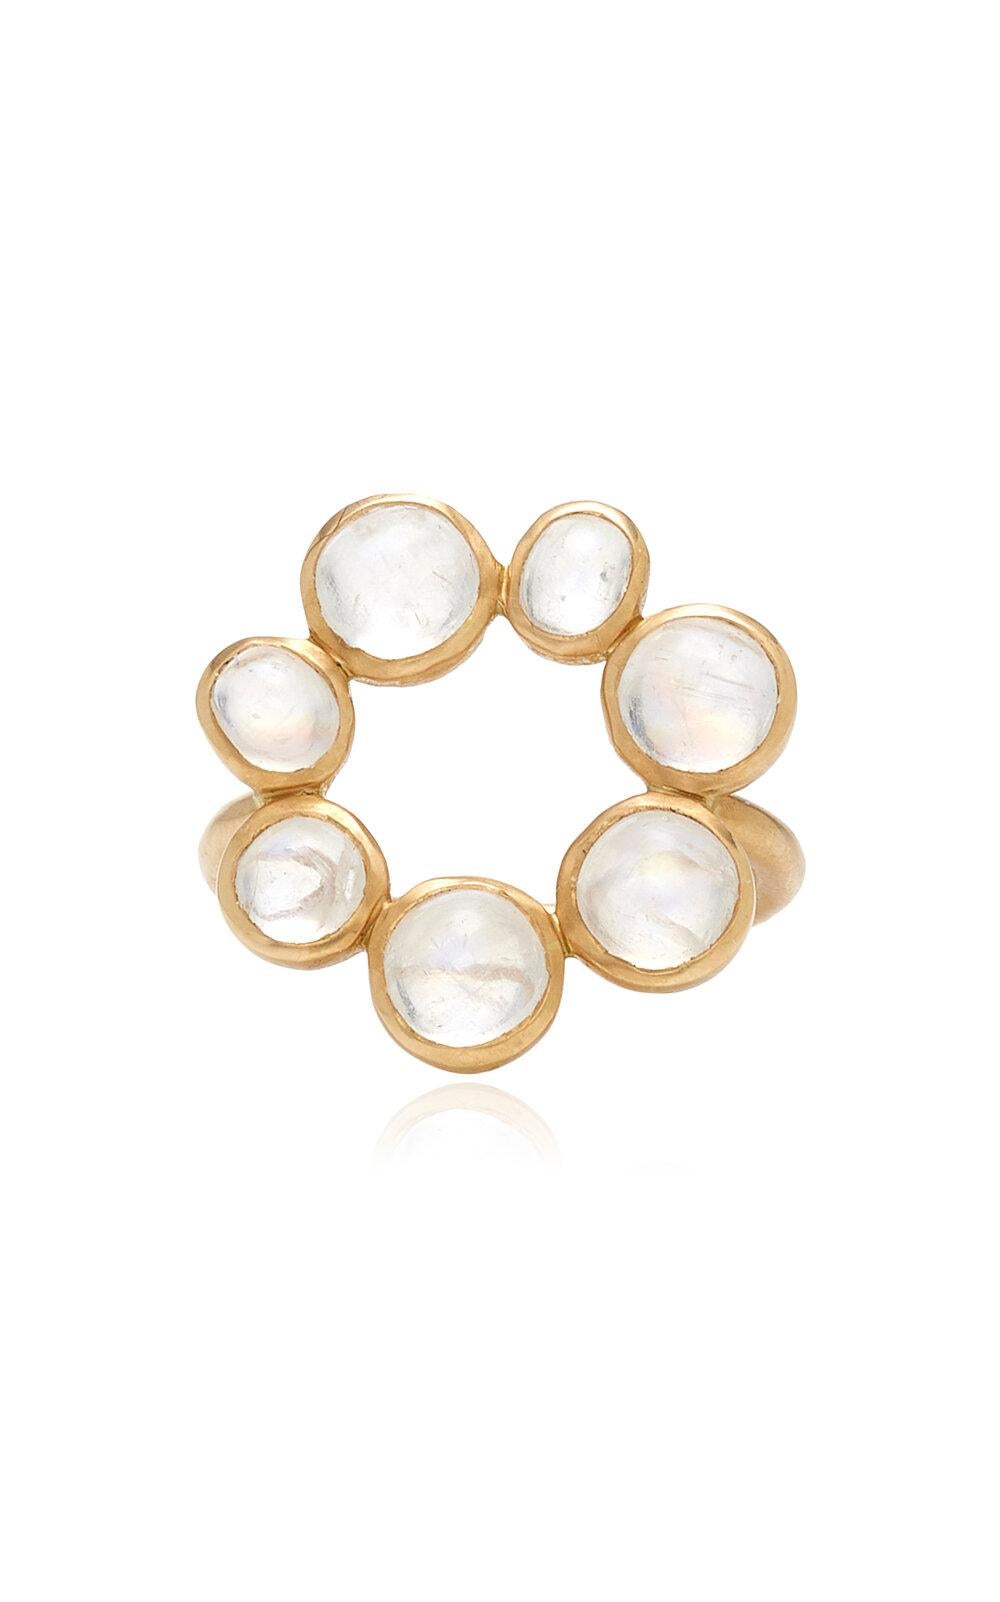 OUROBOROS' Full Circle,' cabochon rainbow moonstones set in 18kt gold.

These rings come in a variety of sizes so please contact the designer.

OUROBOROS’ commitment to using only the most unique stones set in 18 or 24 Karat gold, is matched only to